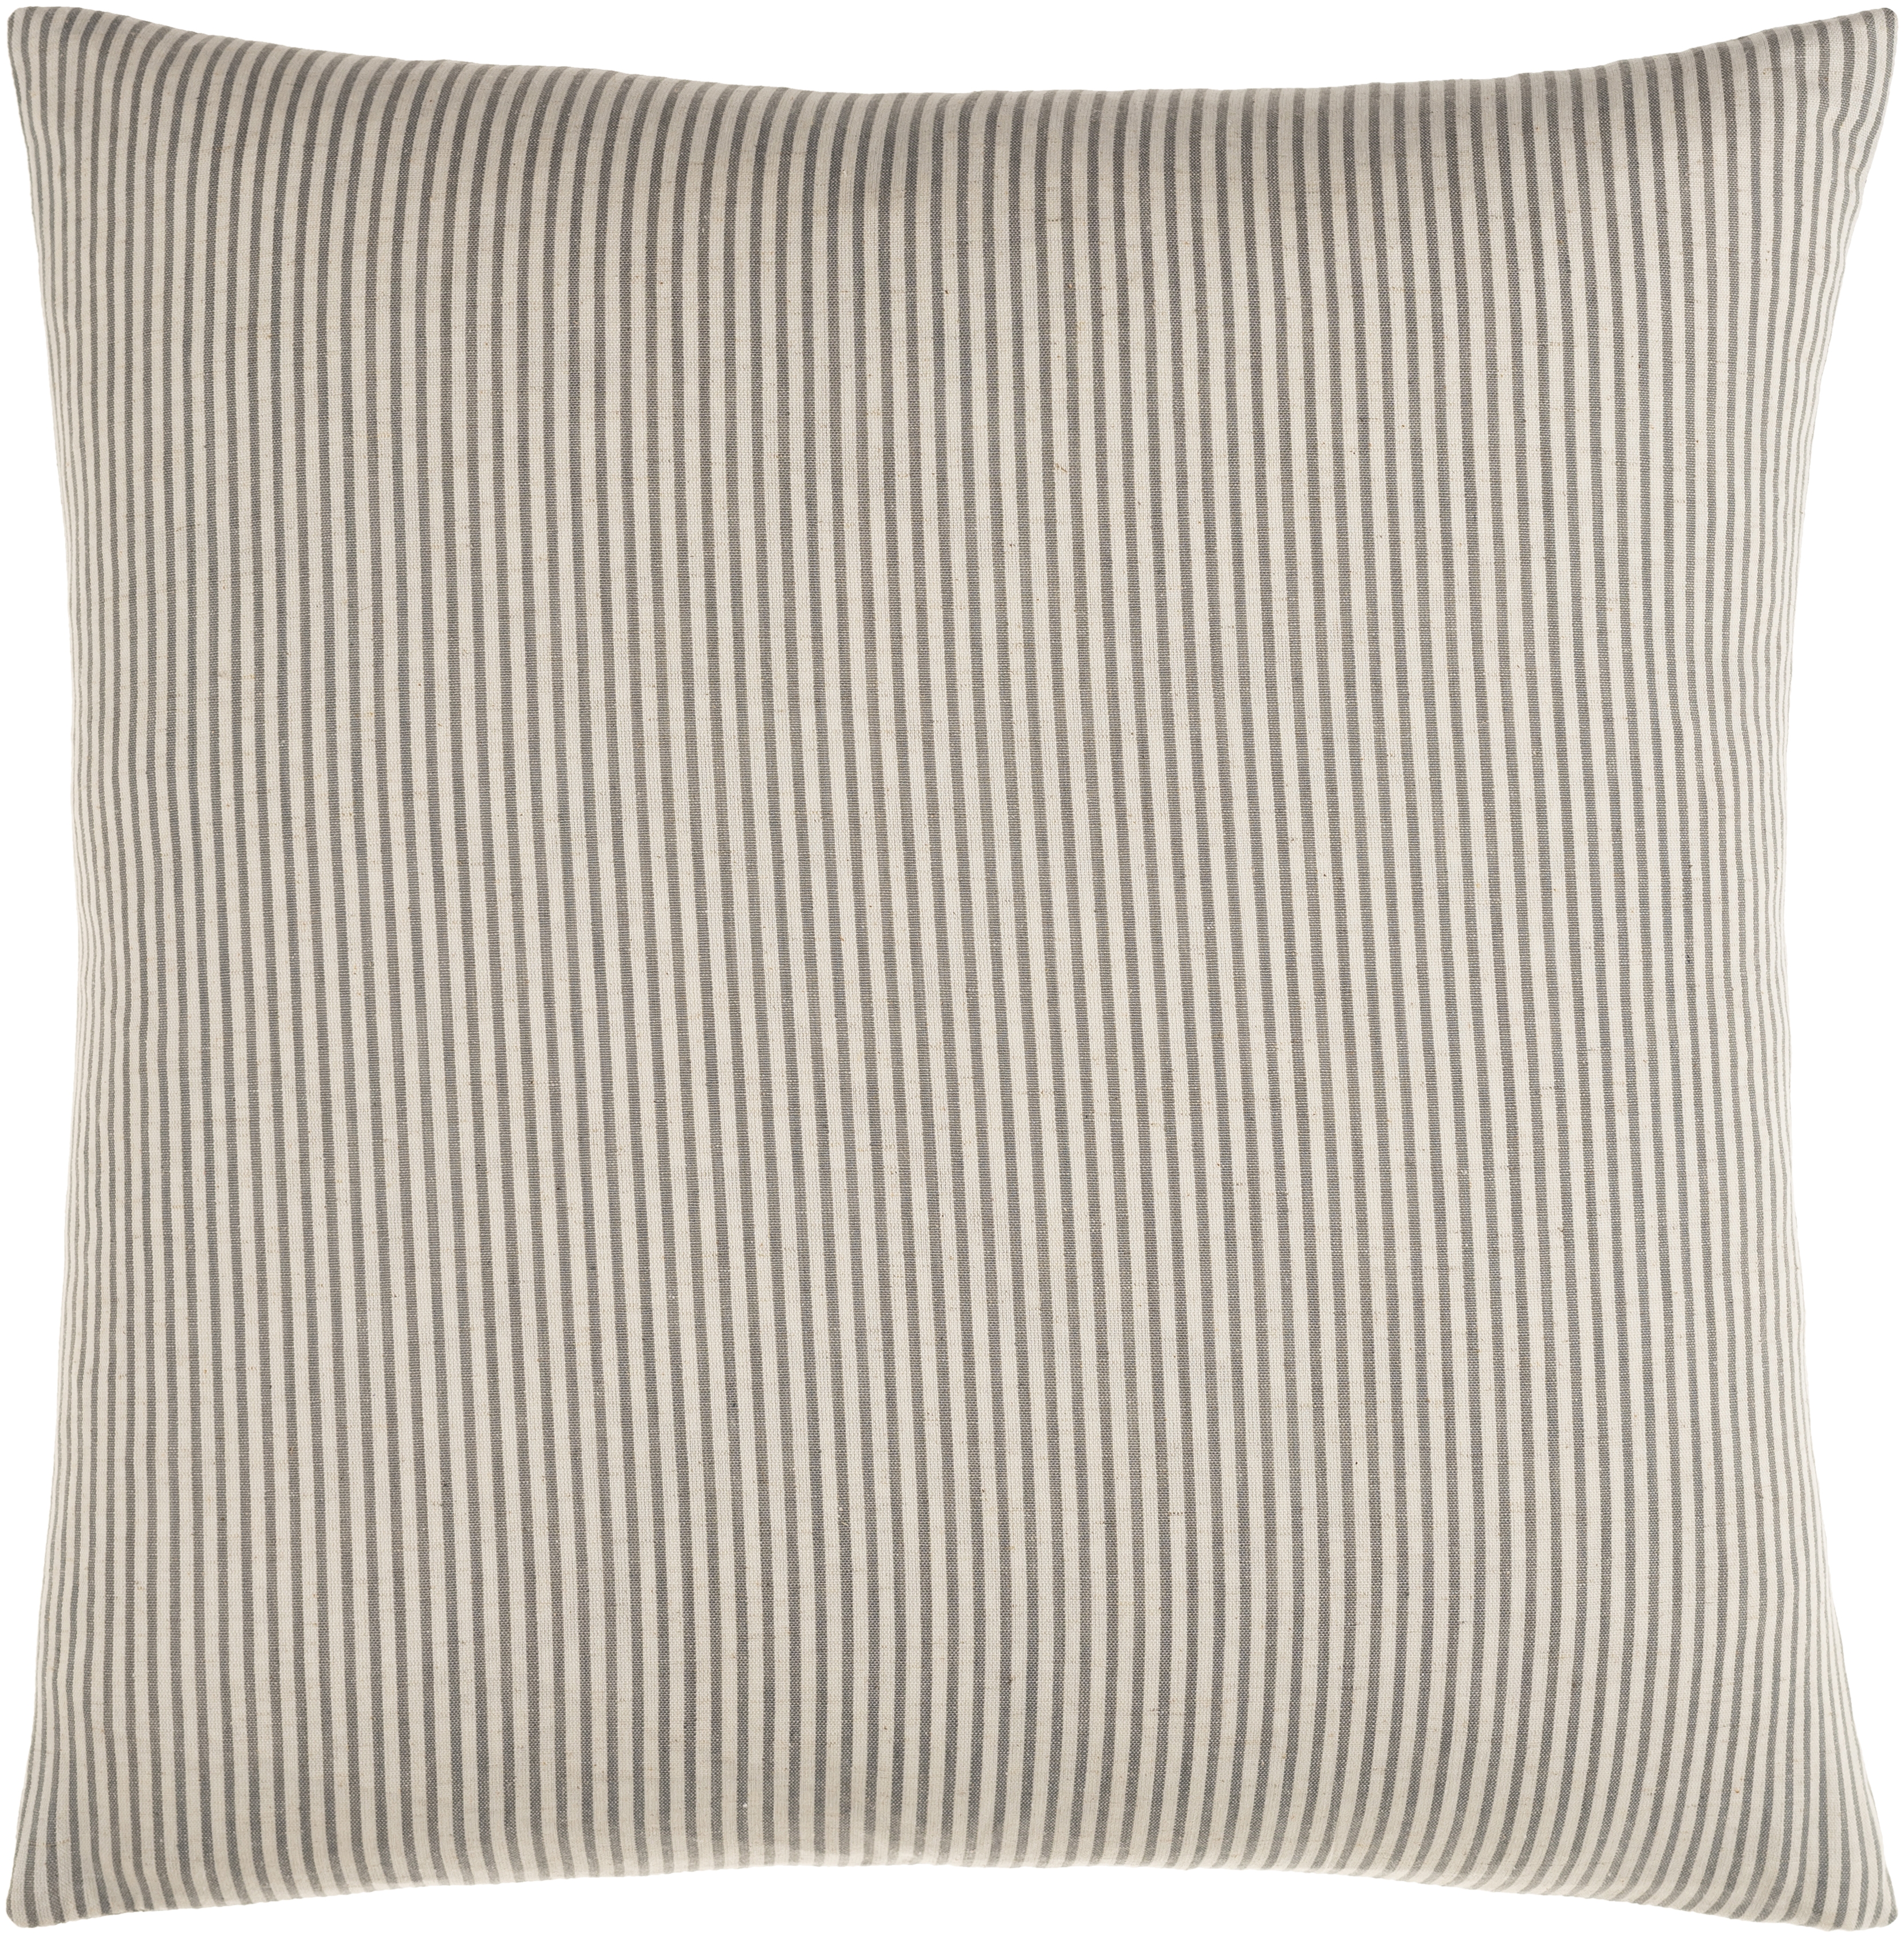 Skinny Stripe Throw Pillow, 20" x 20", with poly insert - Image 0